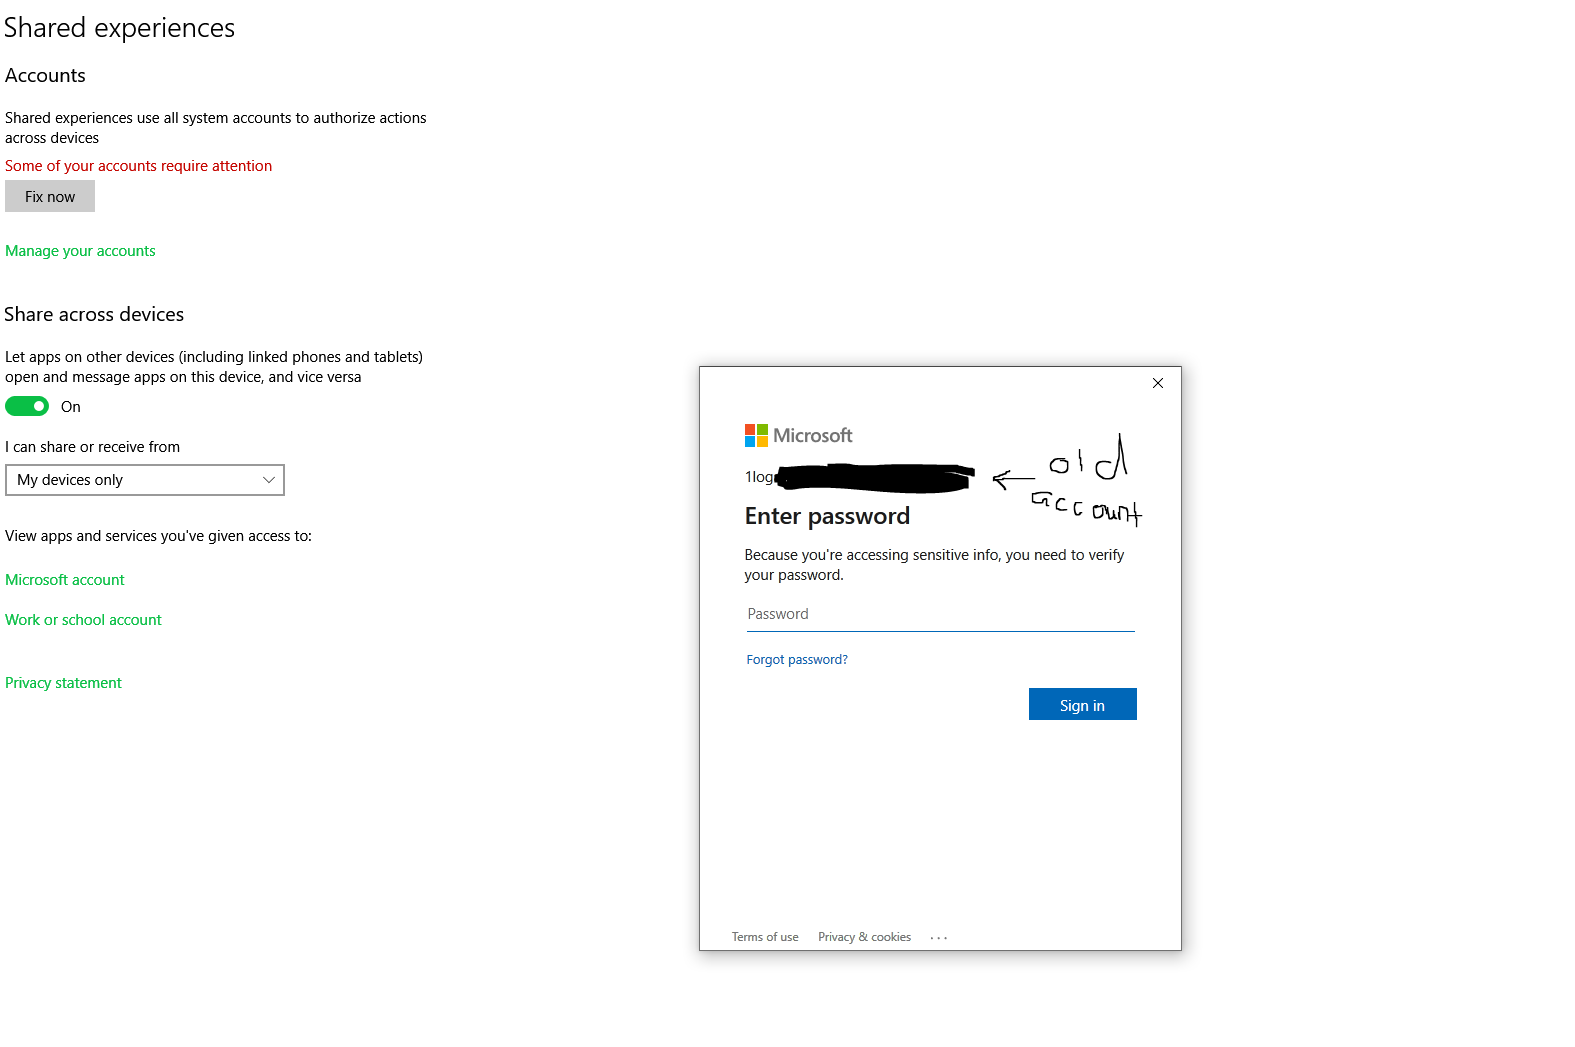 Old microsoft account being required after being deleted c1402e56-4289-4e95-b8ed-2e263749b2ca?upload=true.png